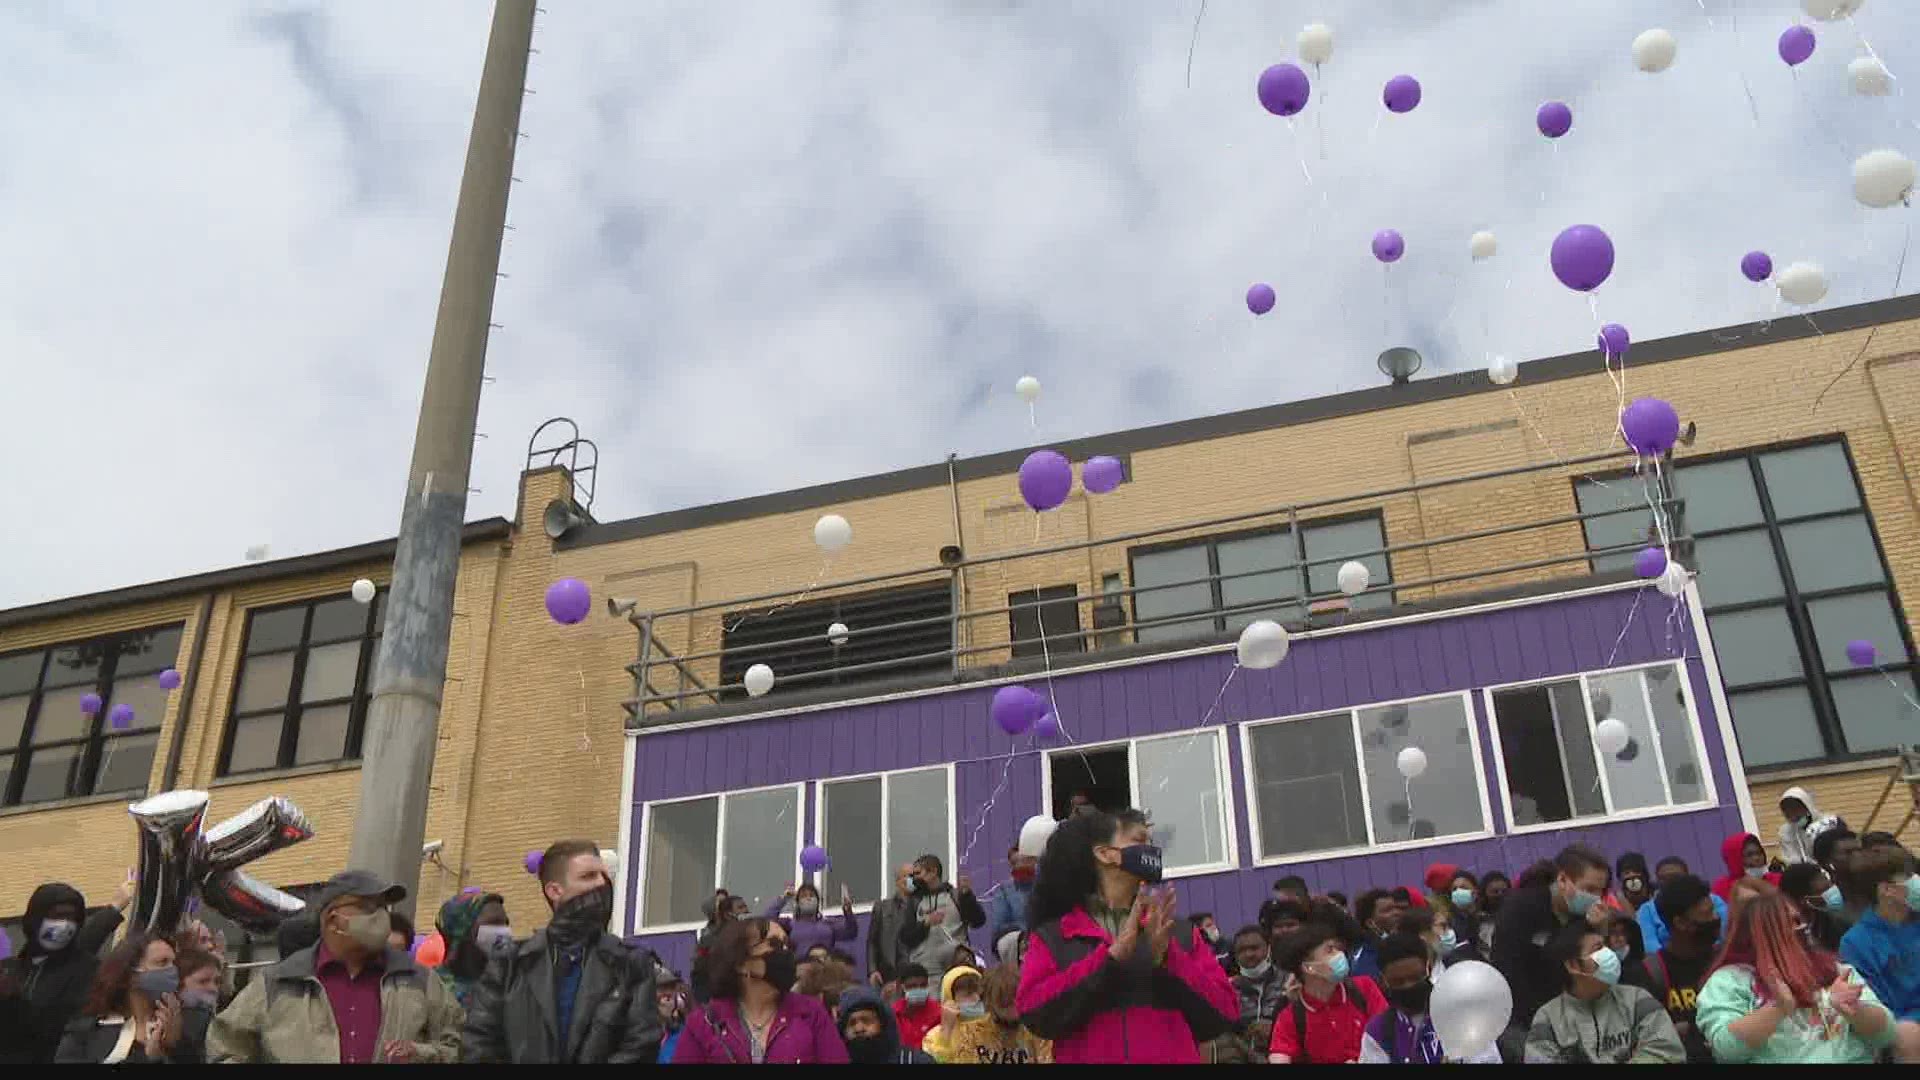 Students and loved ones gathered at Washington High School, Karli's alma mater.